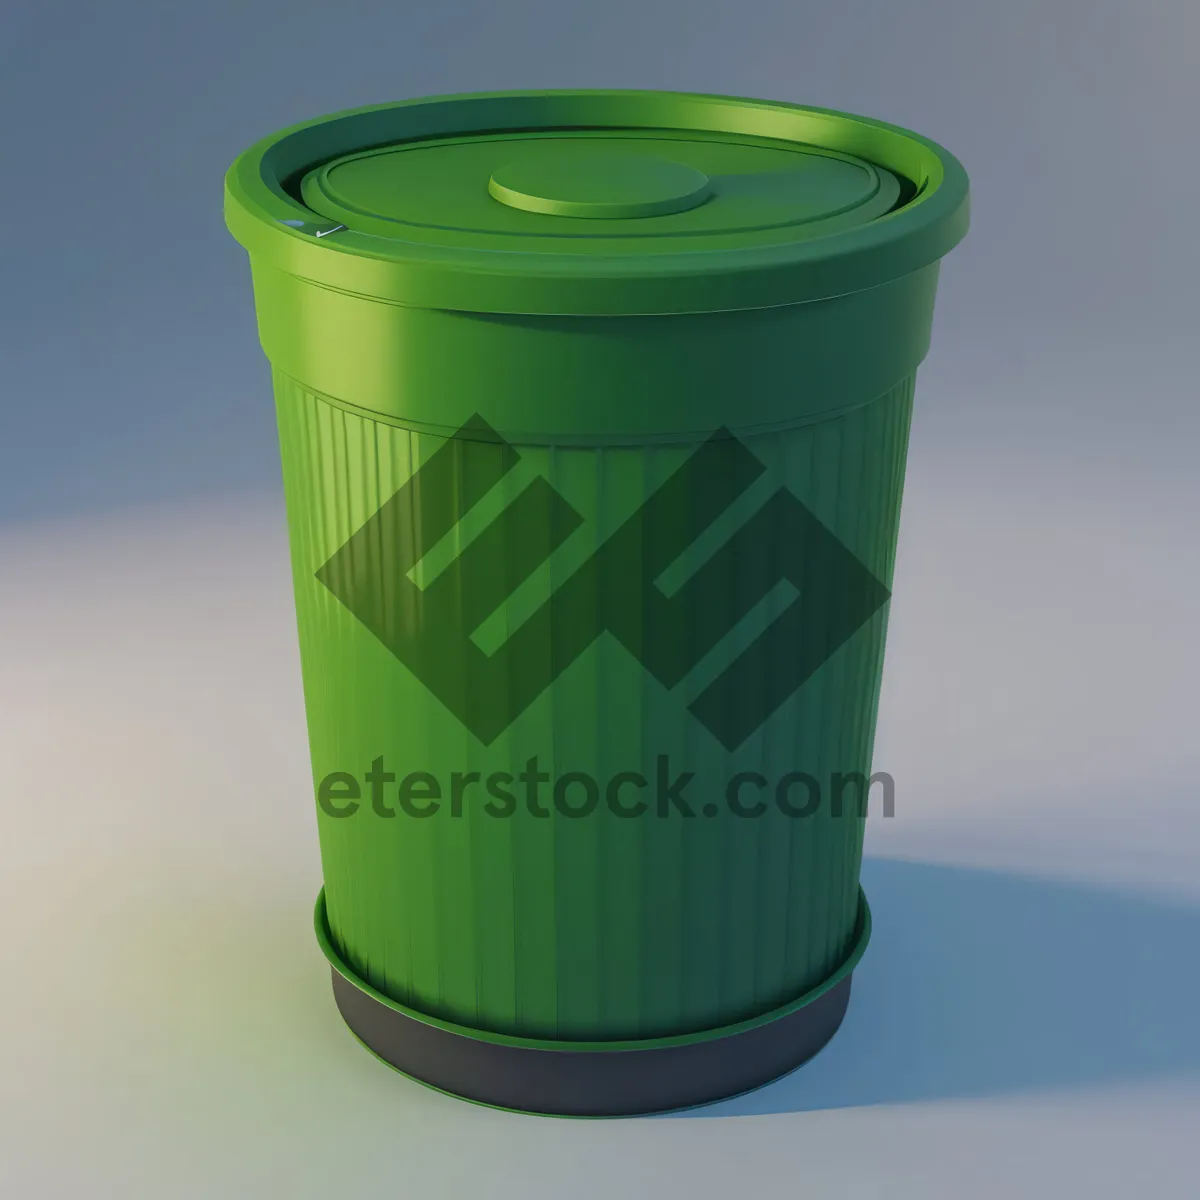 Picture of Container for Liquid Waste Disposal